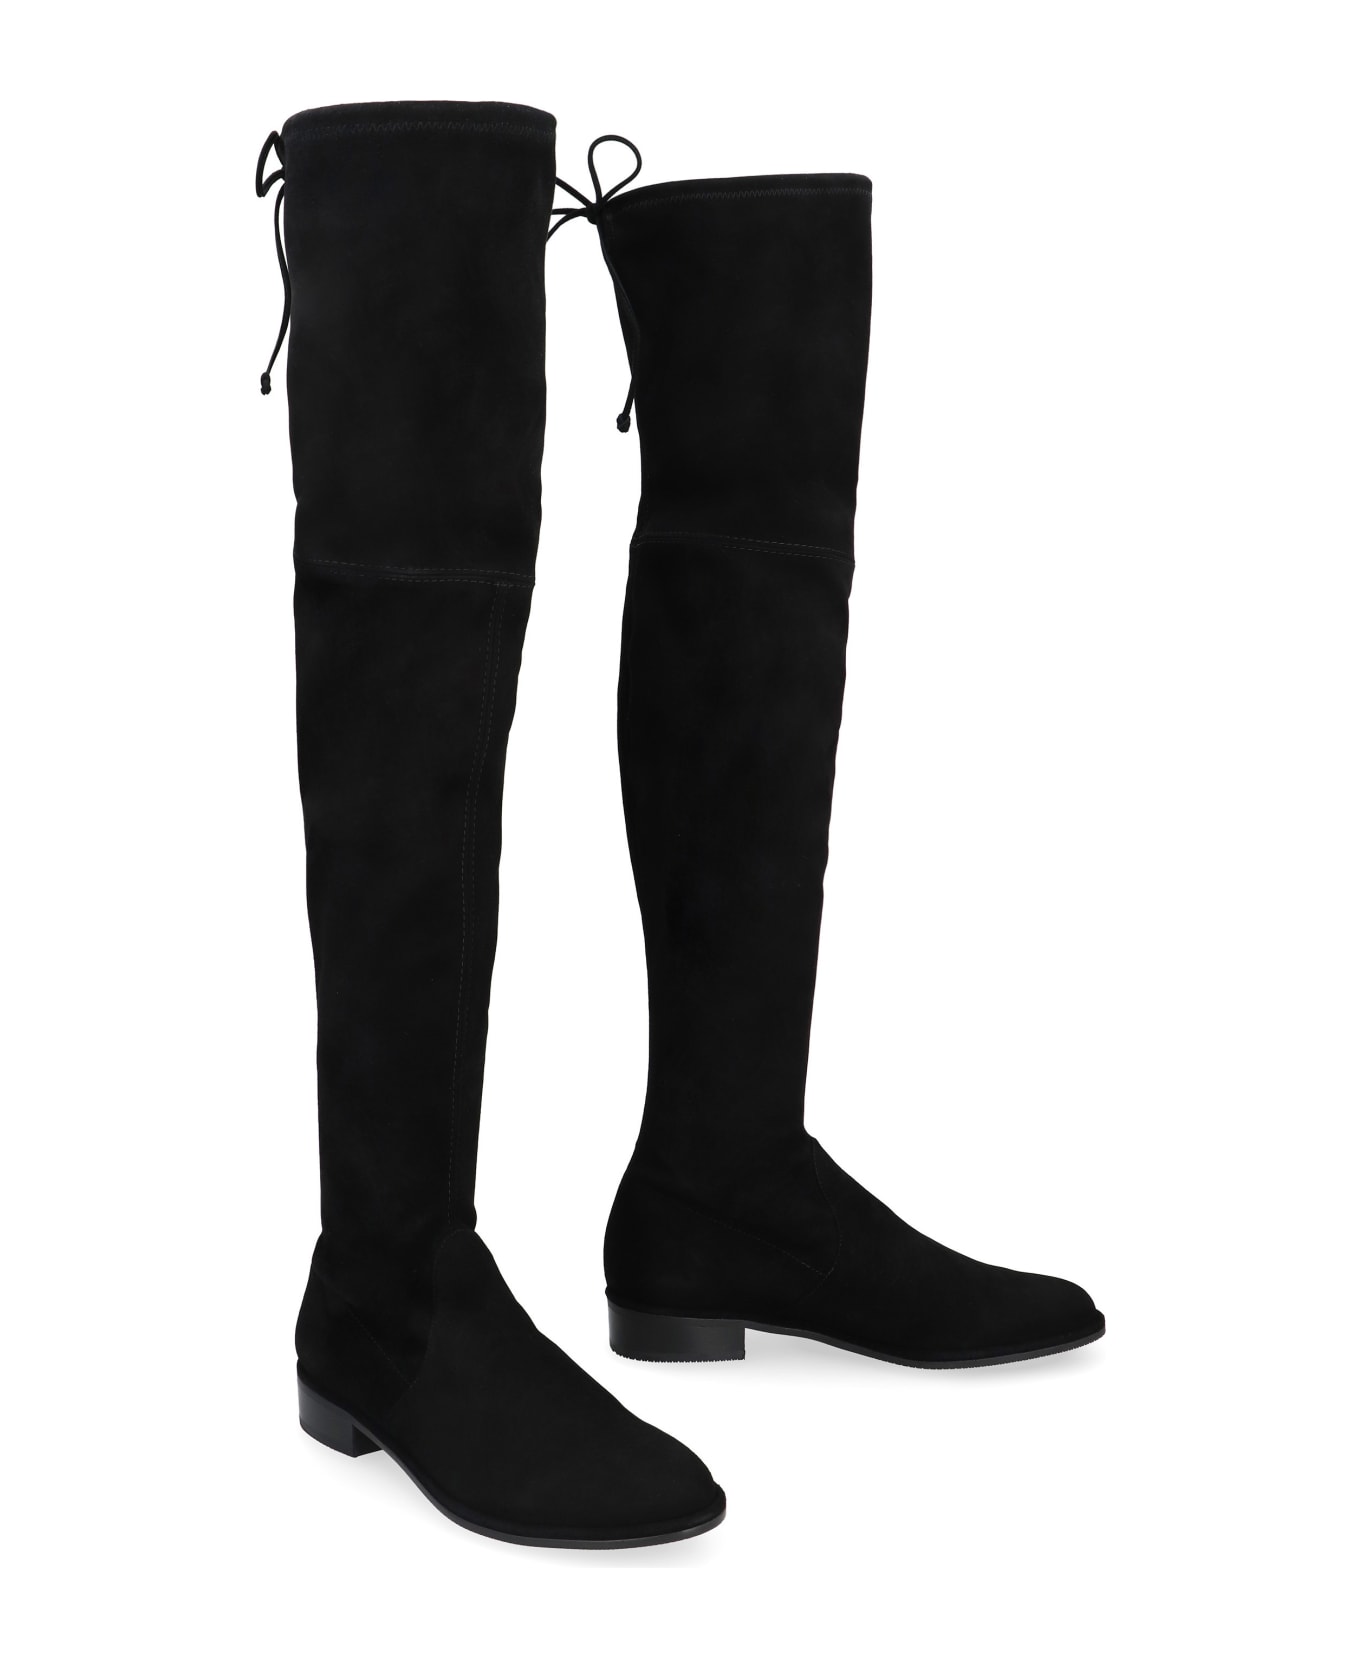 Stuart Weitzman Lowland Stretch Suede Over The Knee Boots - black ブーツ